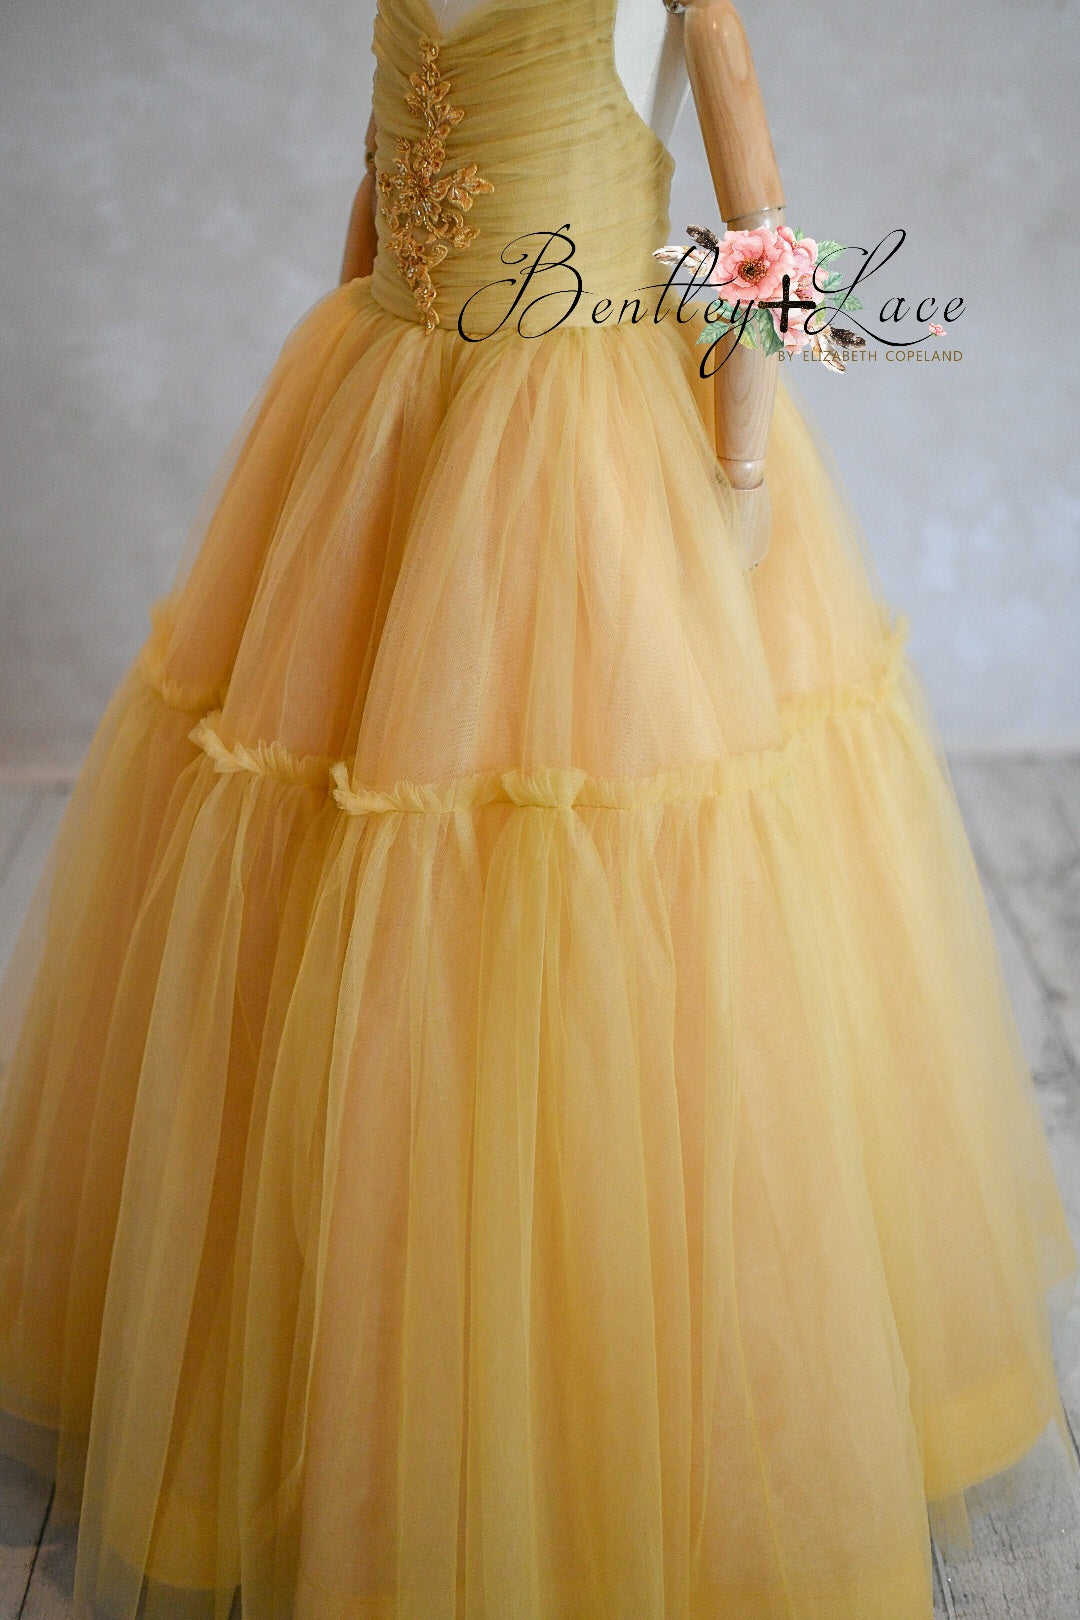 Pre order - PLEATED BODICE NO APPLIQUE custom Hillary/Frenchie Solid gown- choose color Editorial Dress, Couture Gown, Special Occasion Dress